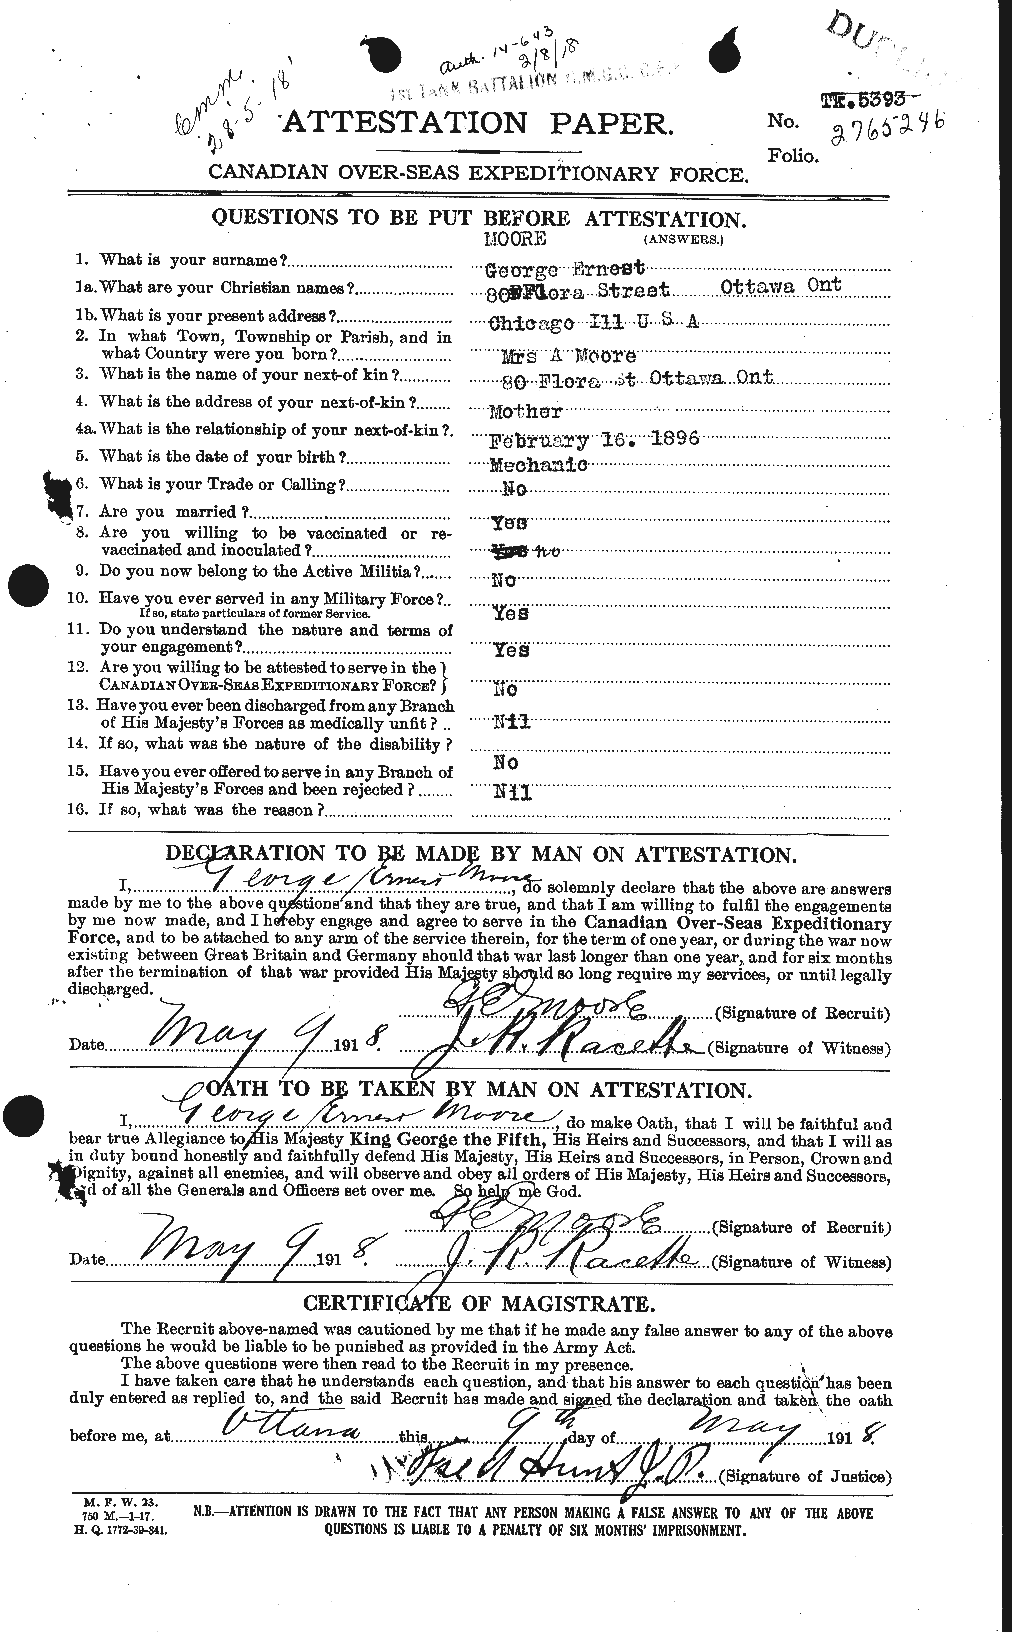 Personnel Records of the First World War - CEF 502000a